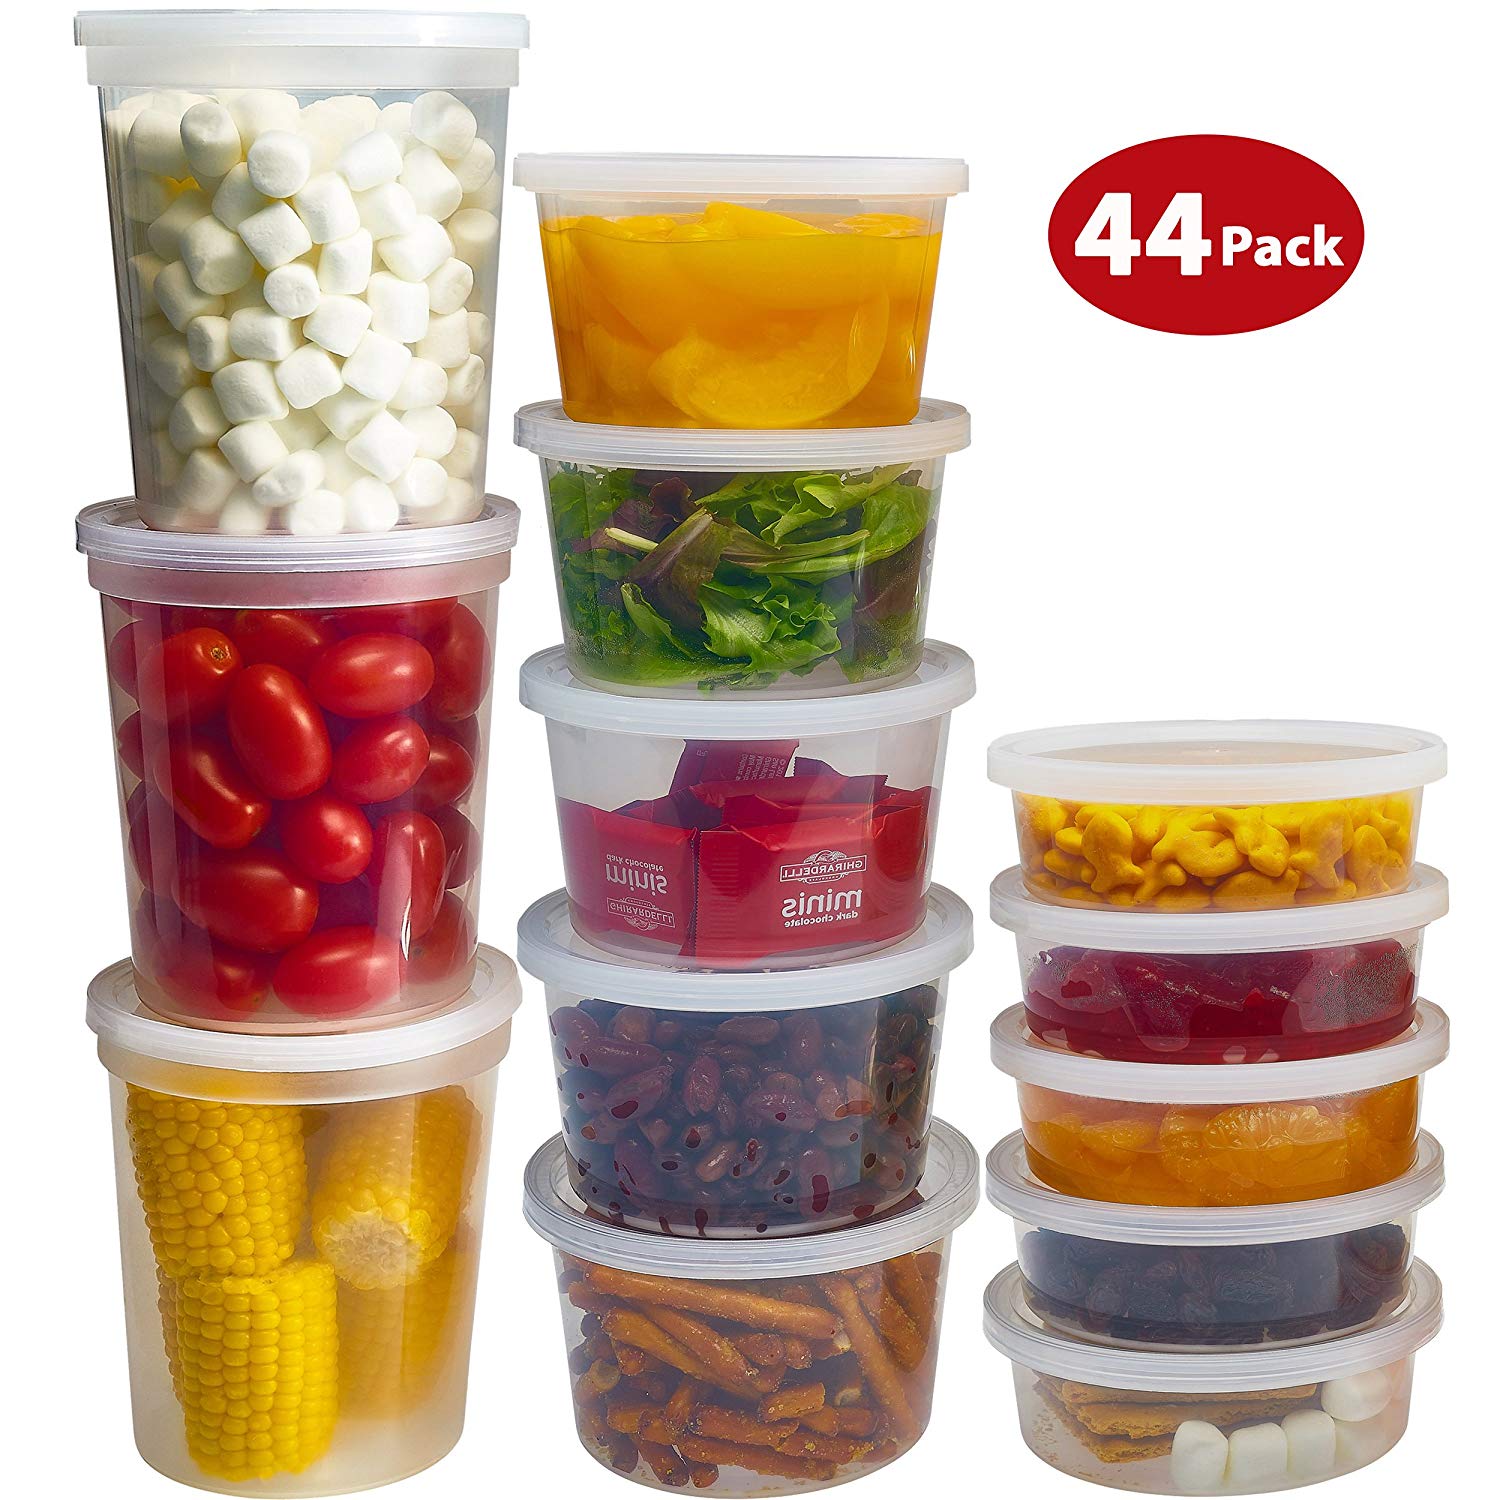 https://www.dontwasteyourmoney.com/wp-content/uploads/2019/10/durahome-food-storage-containers-storage-for-leftovers.jpg